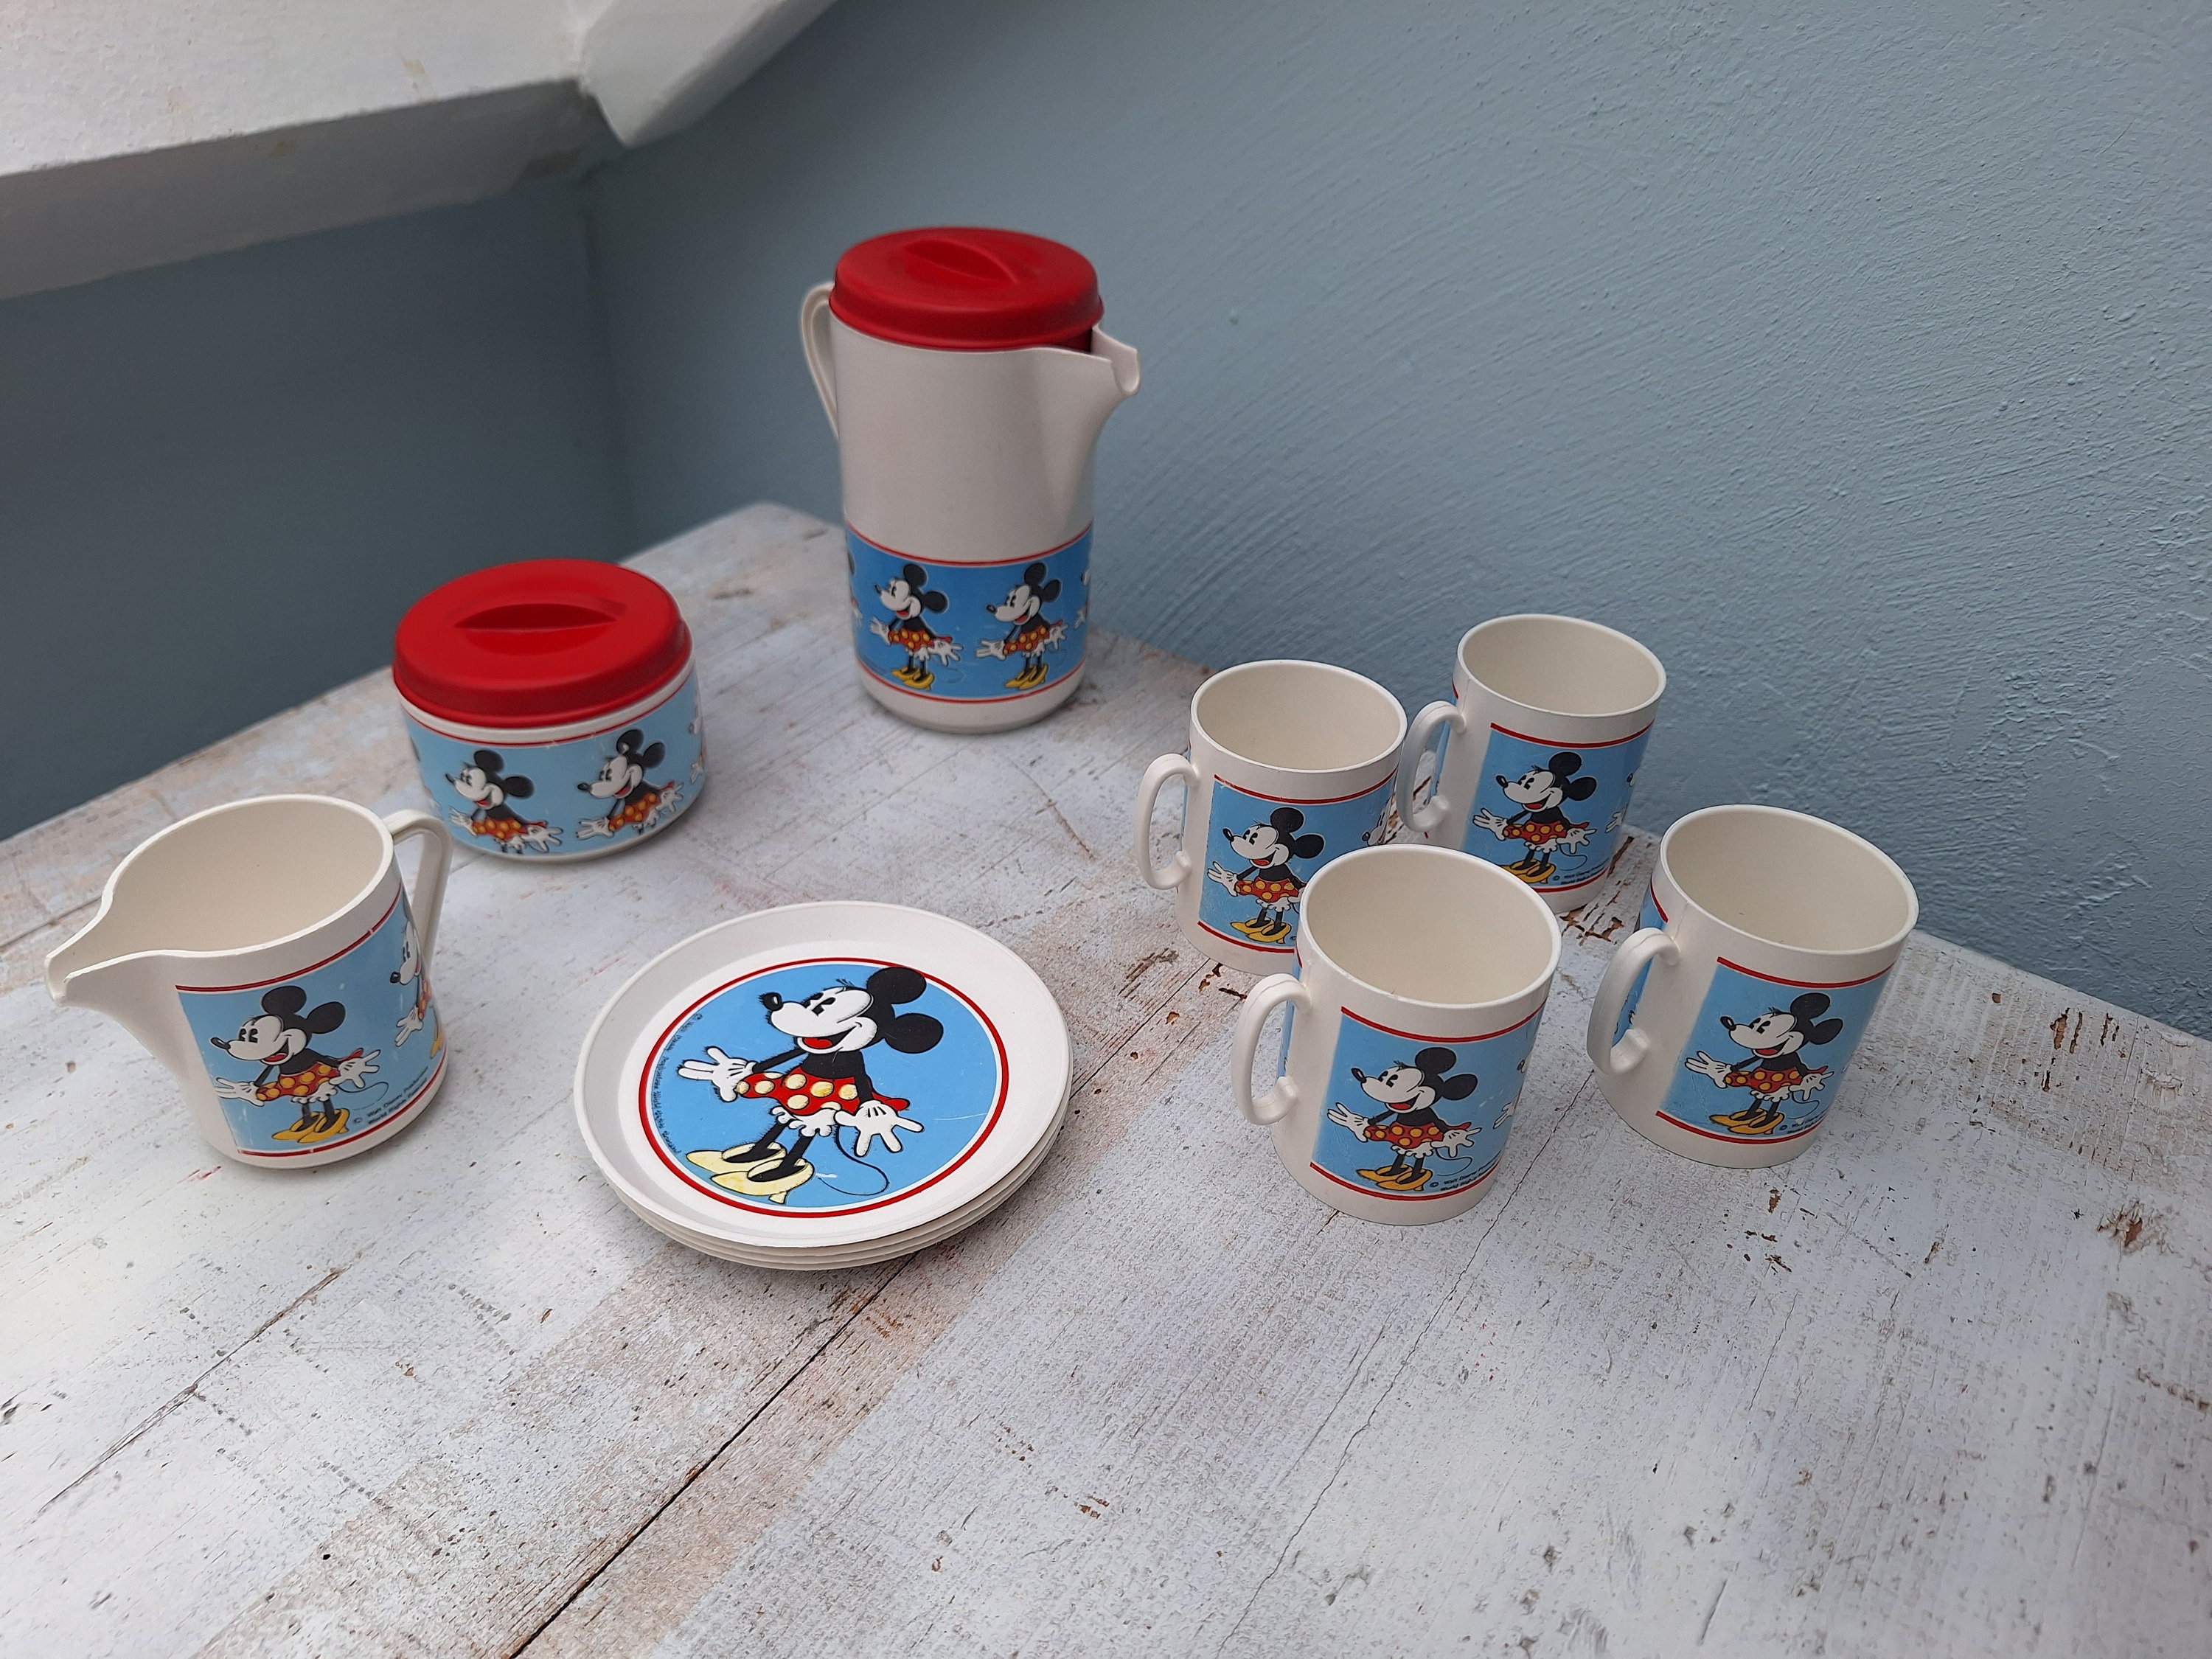 Baby Deals UK - Minnie Mouse Wooden Kitchen and Accessories, £55